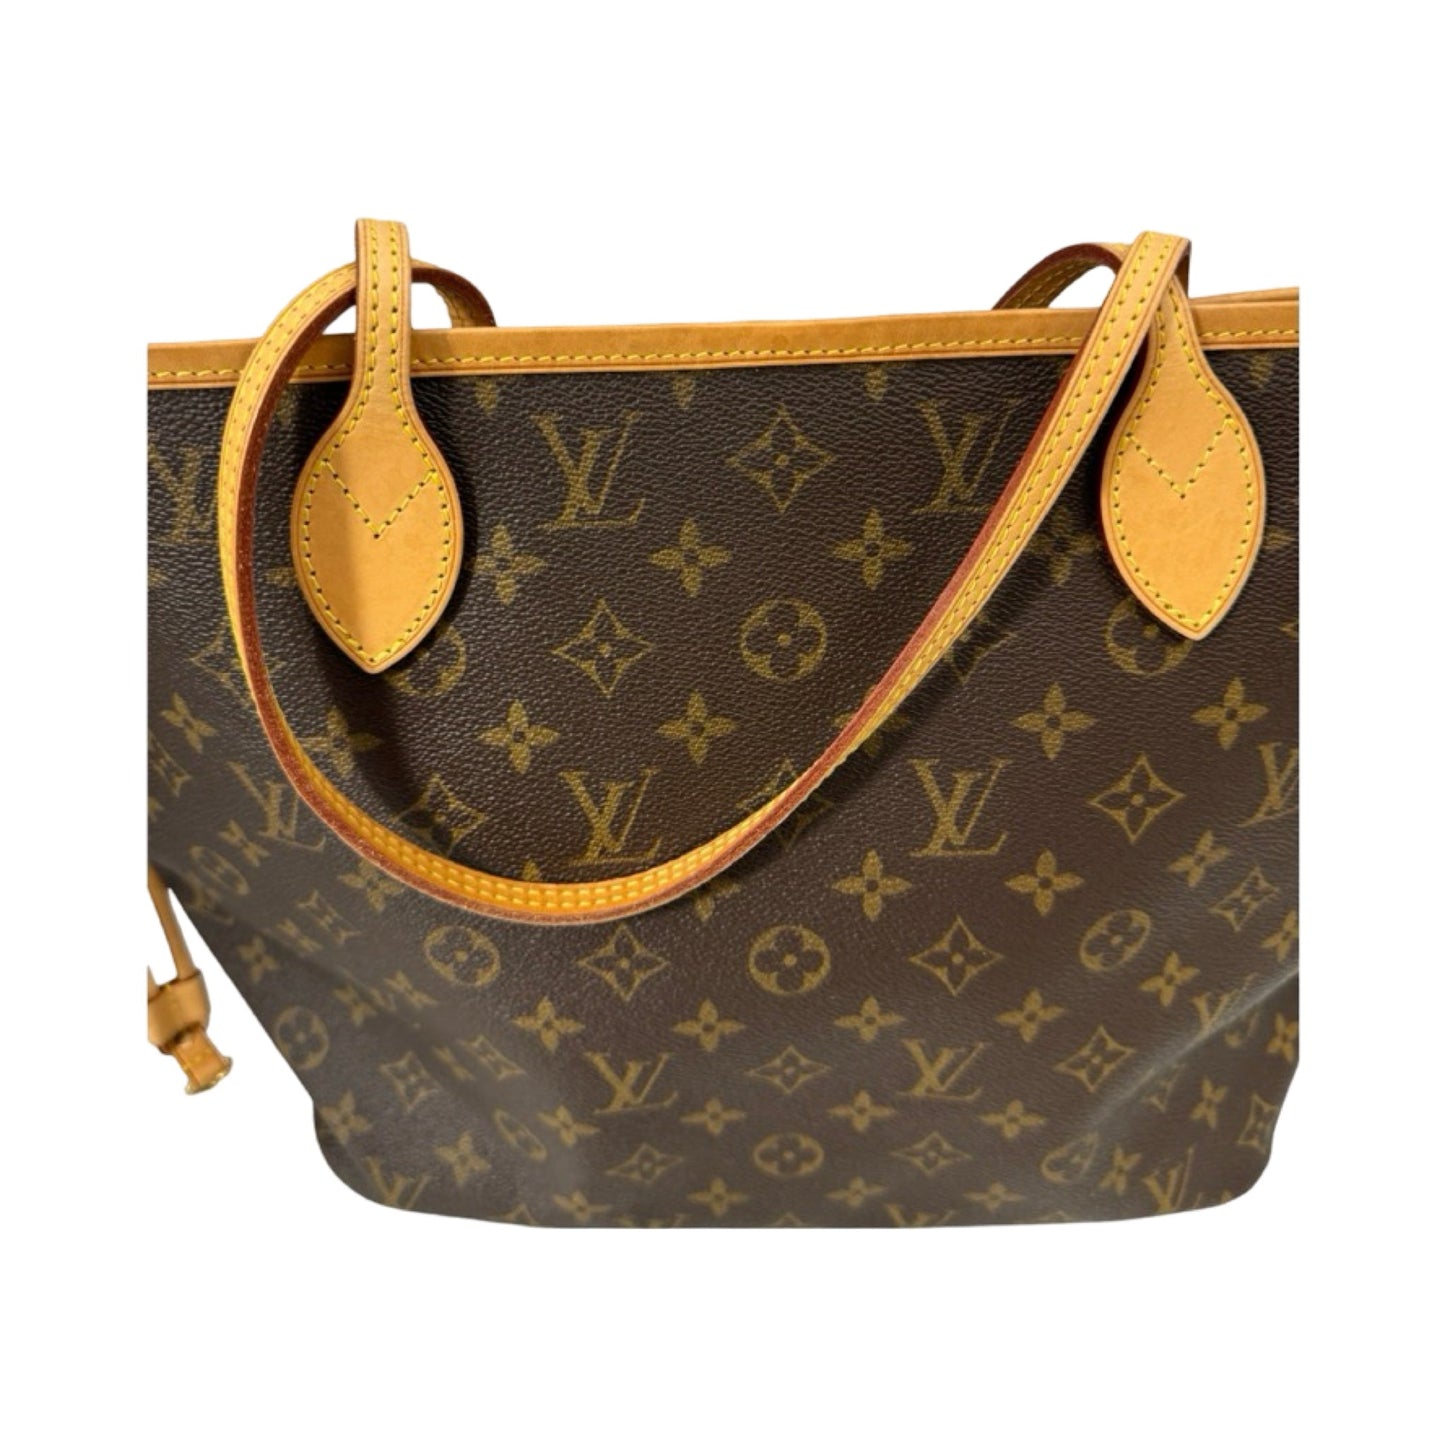 Neverfull Coated Canvas Monogram Brown Dual Vachetta Leather Straps with Gold-Tone Hardware Tote Luxury Designer Louis Vuitton, Size Medium